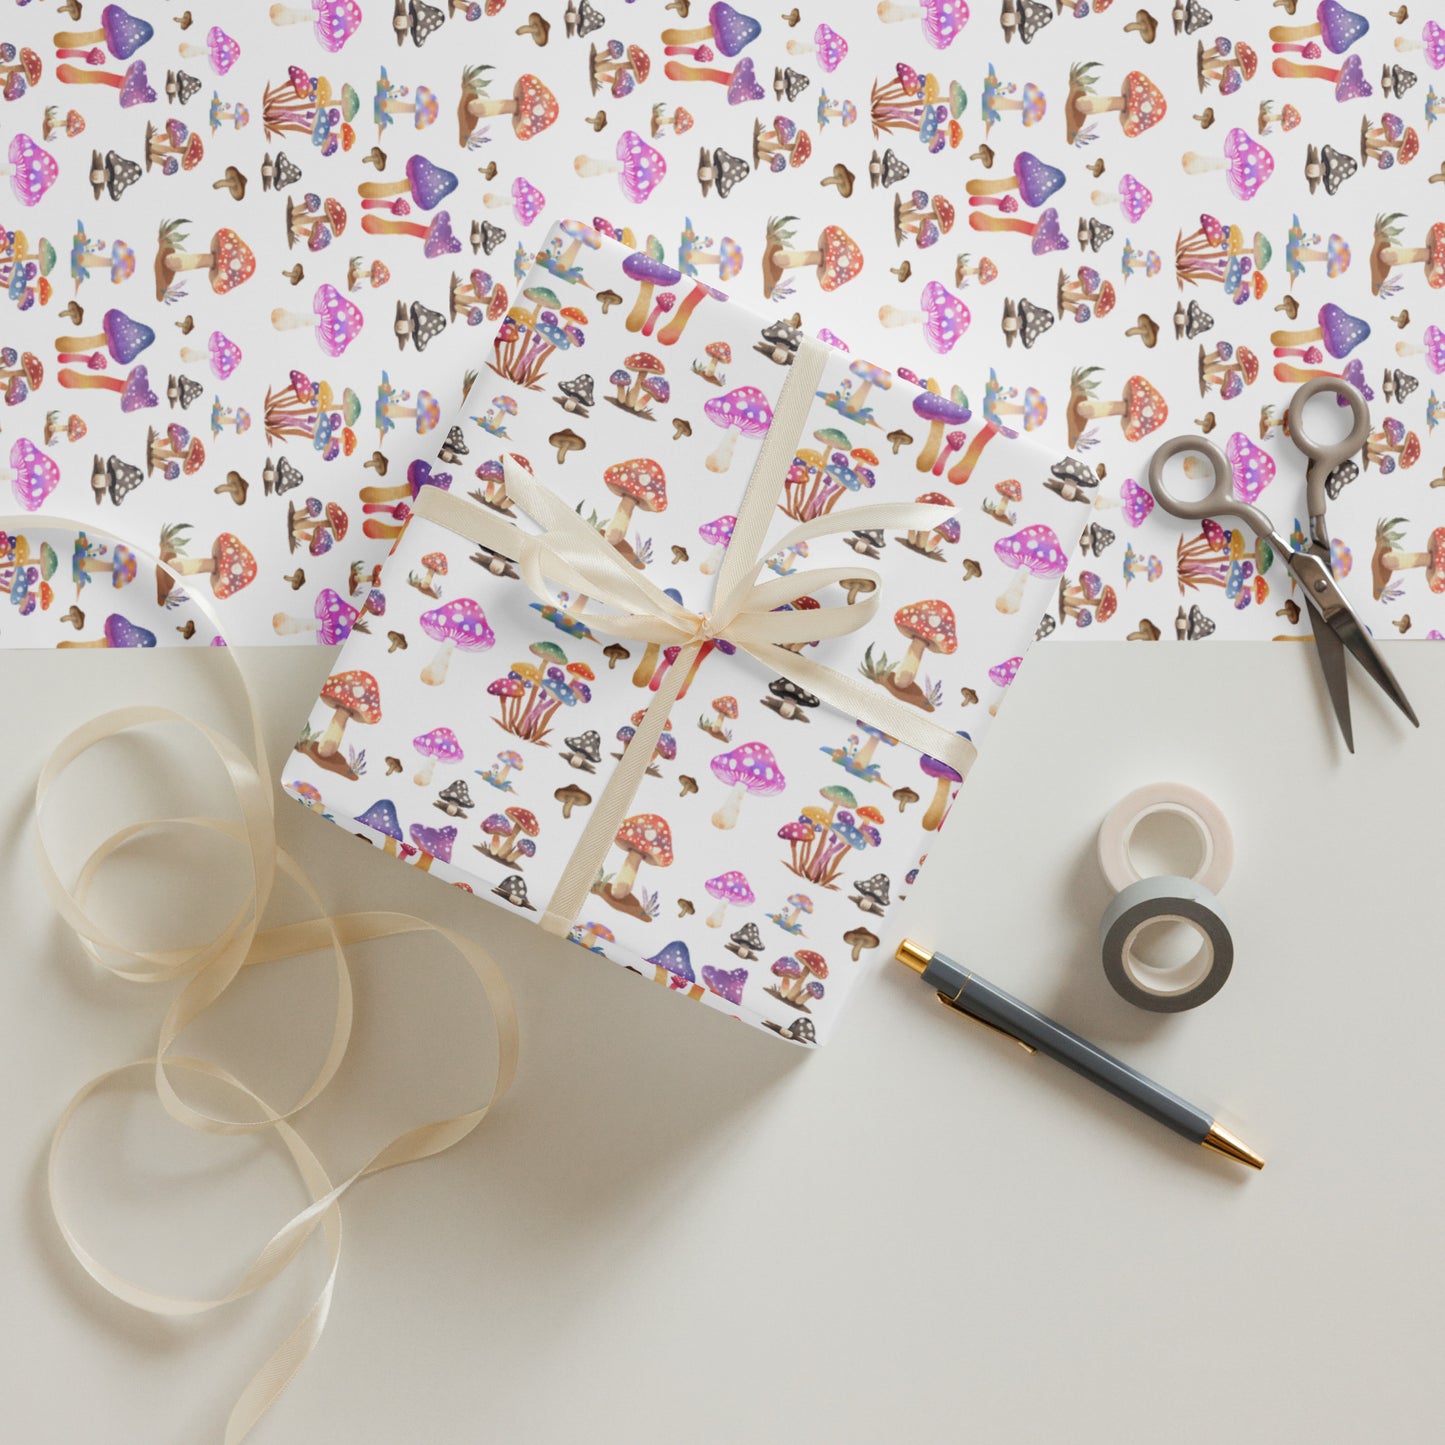 Fancy Mushrooms Wrapping paper sheets